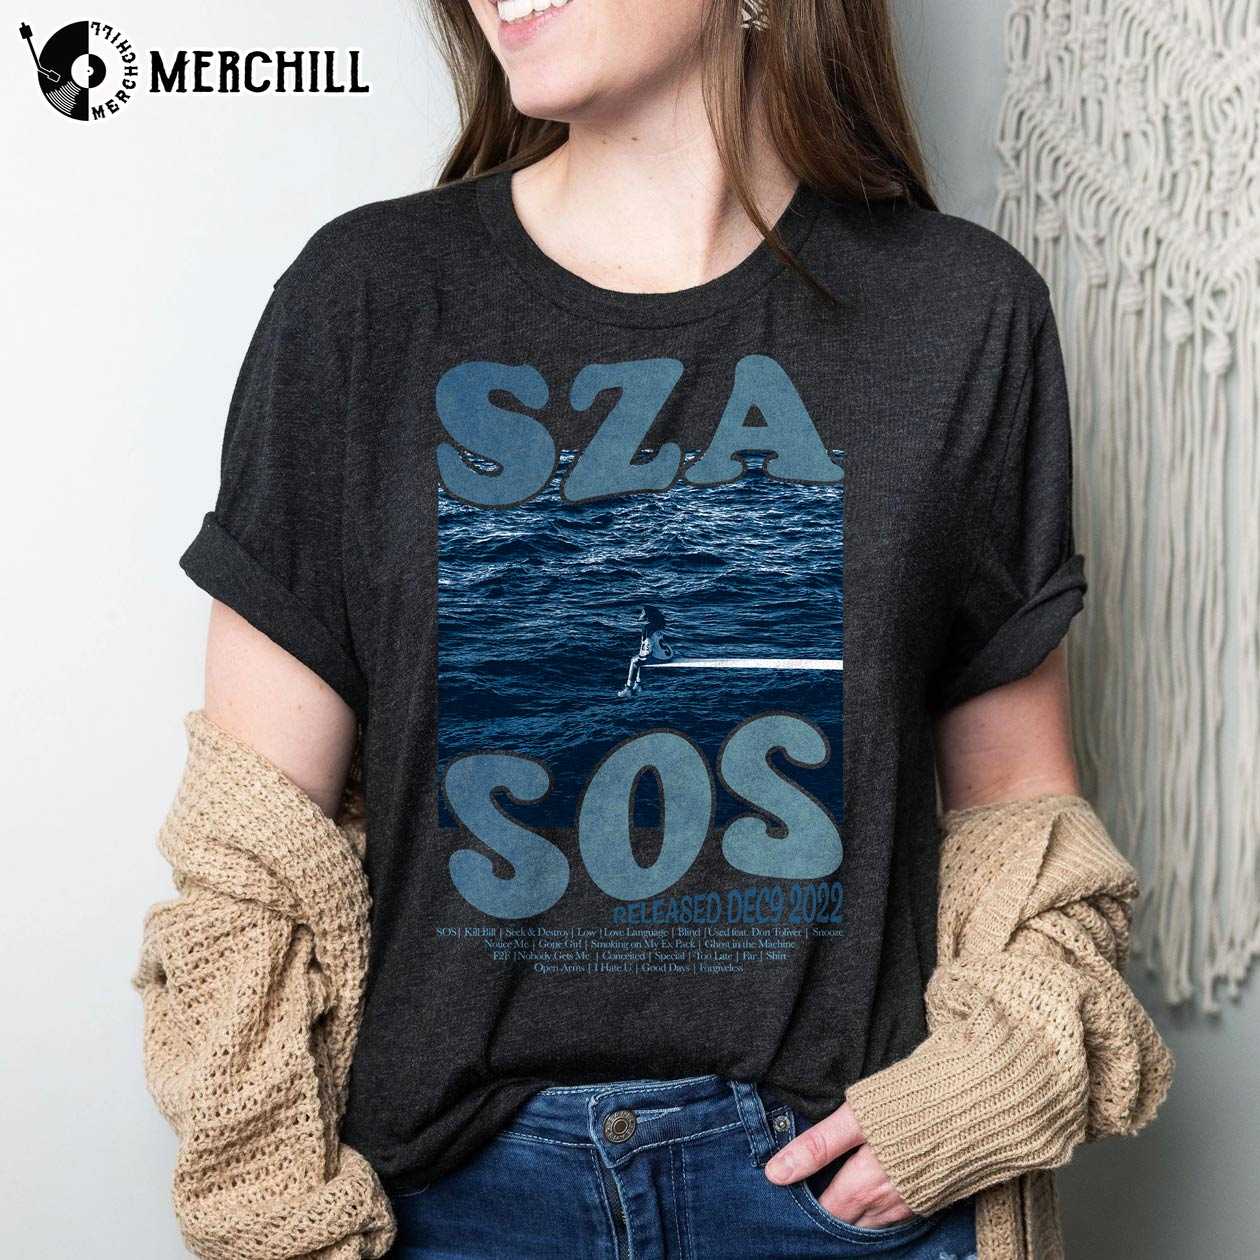 Vintage SZA SOS Hoodie, SZA Shirt, S.O.S New Album Sweatshirt, Sza Merch -  Bring Your Ideas, Thoughts And Imaginations Into Reality Today